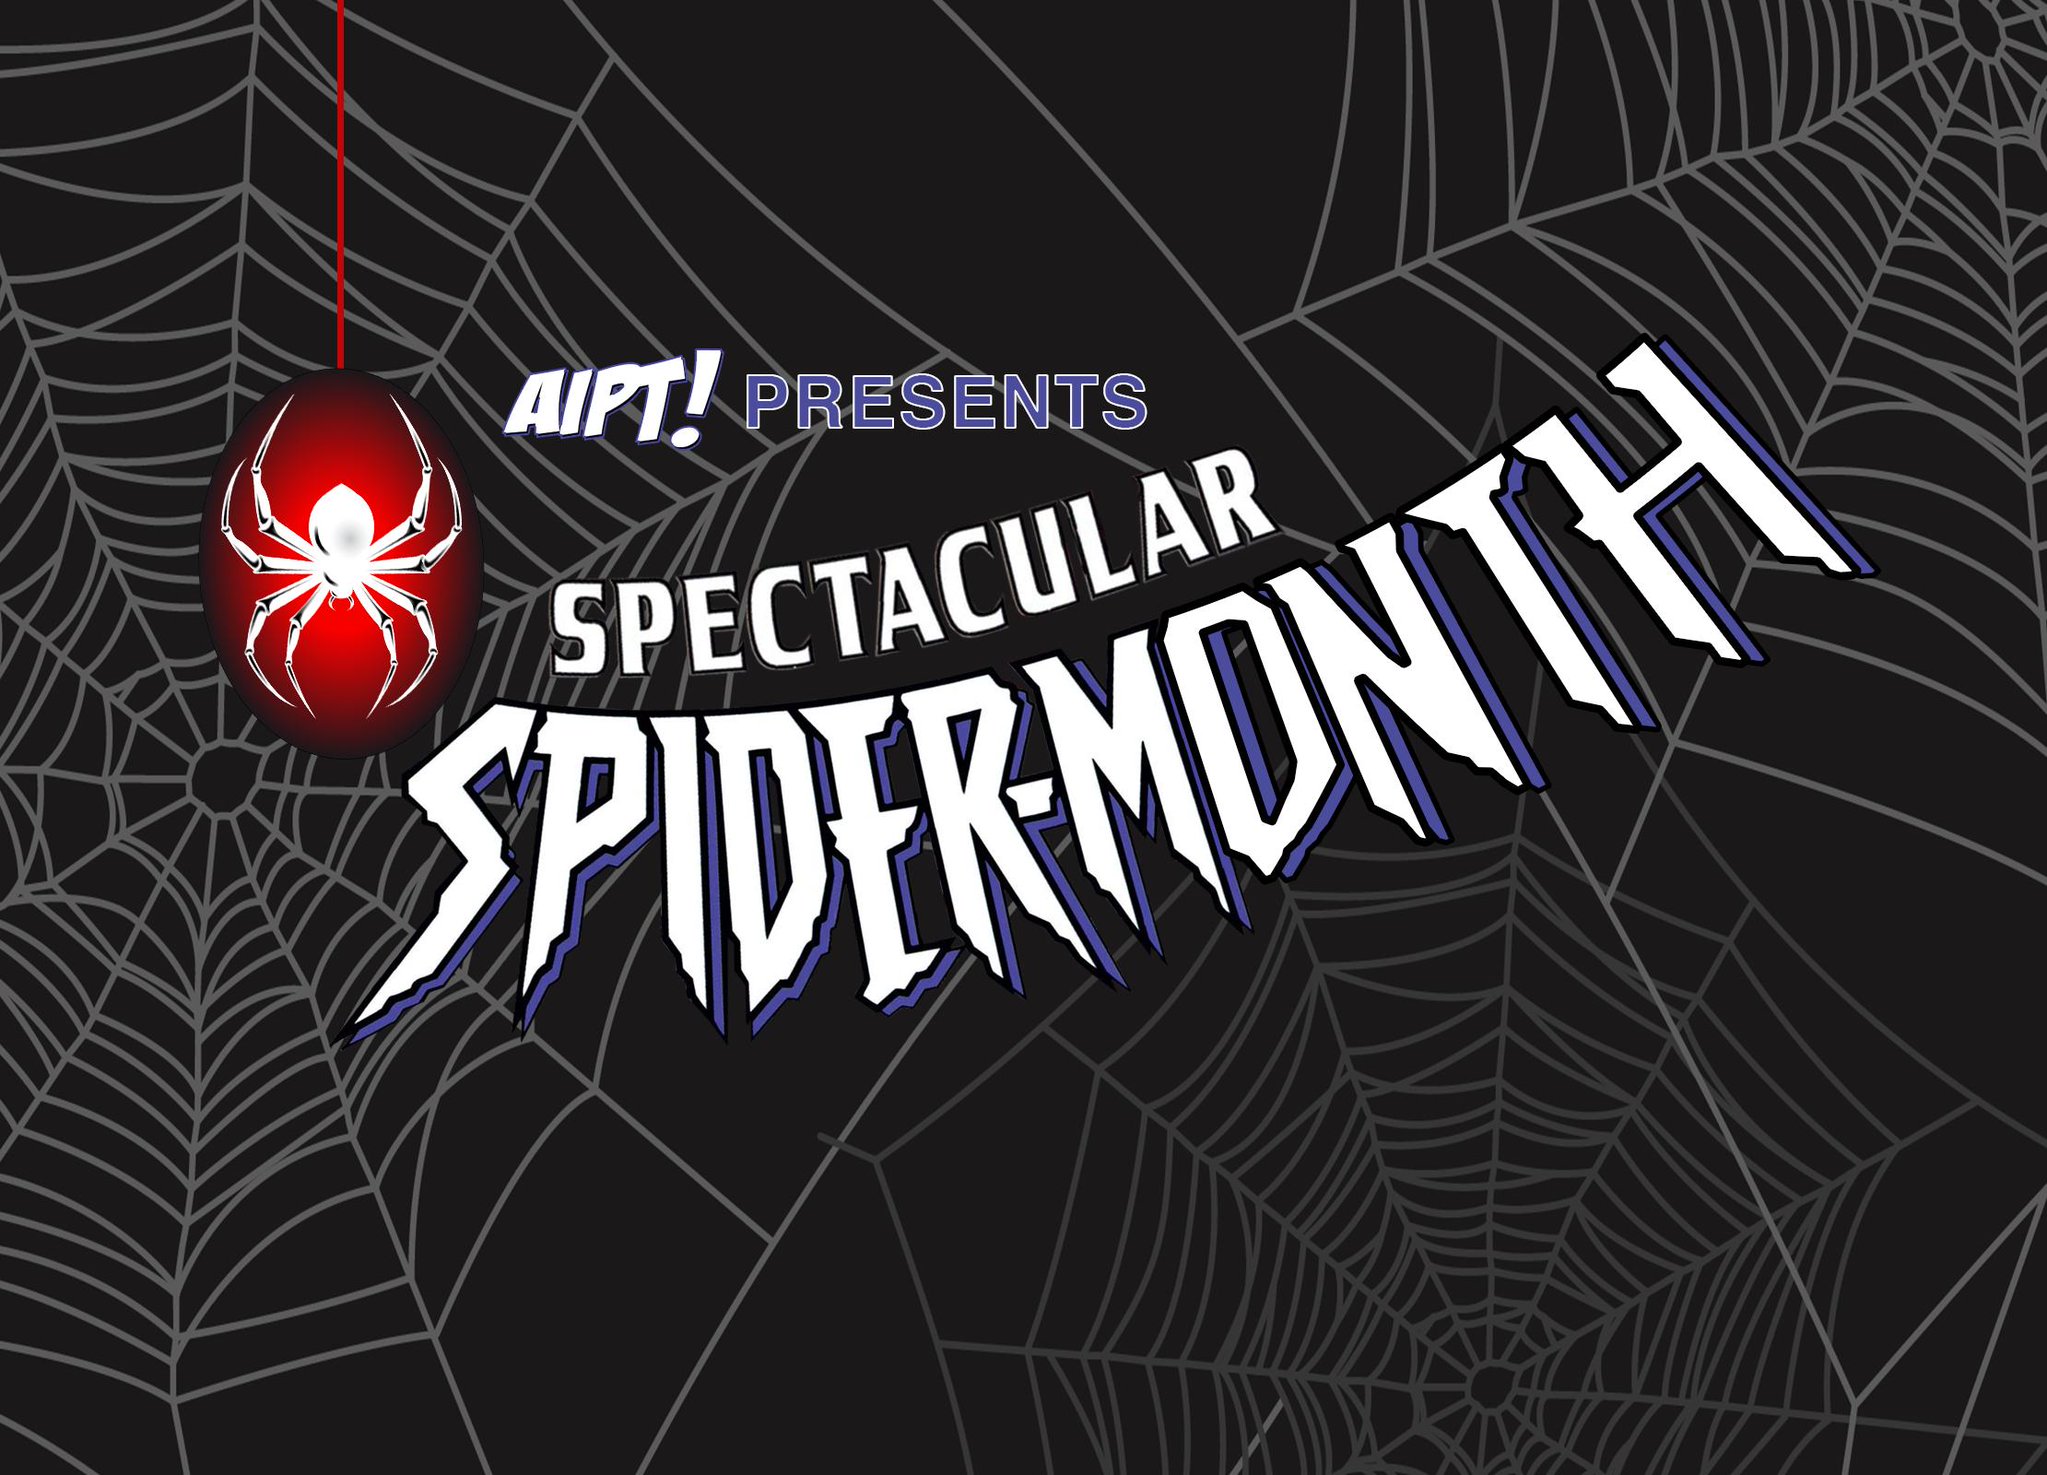 Welcome to AiPT!'s Spectacular Spider-Month